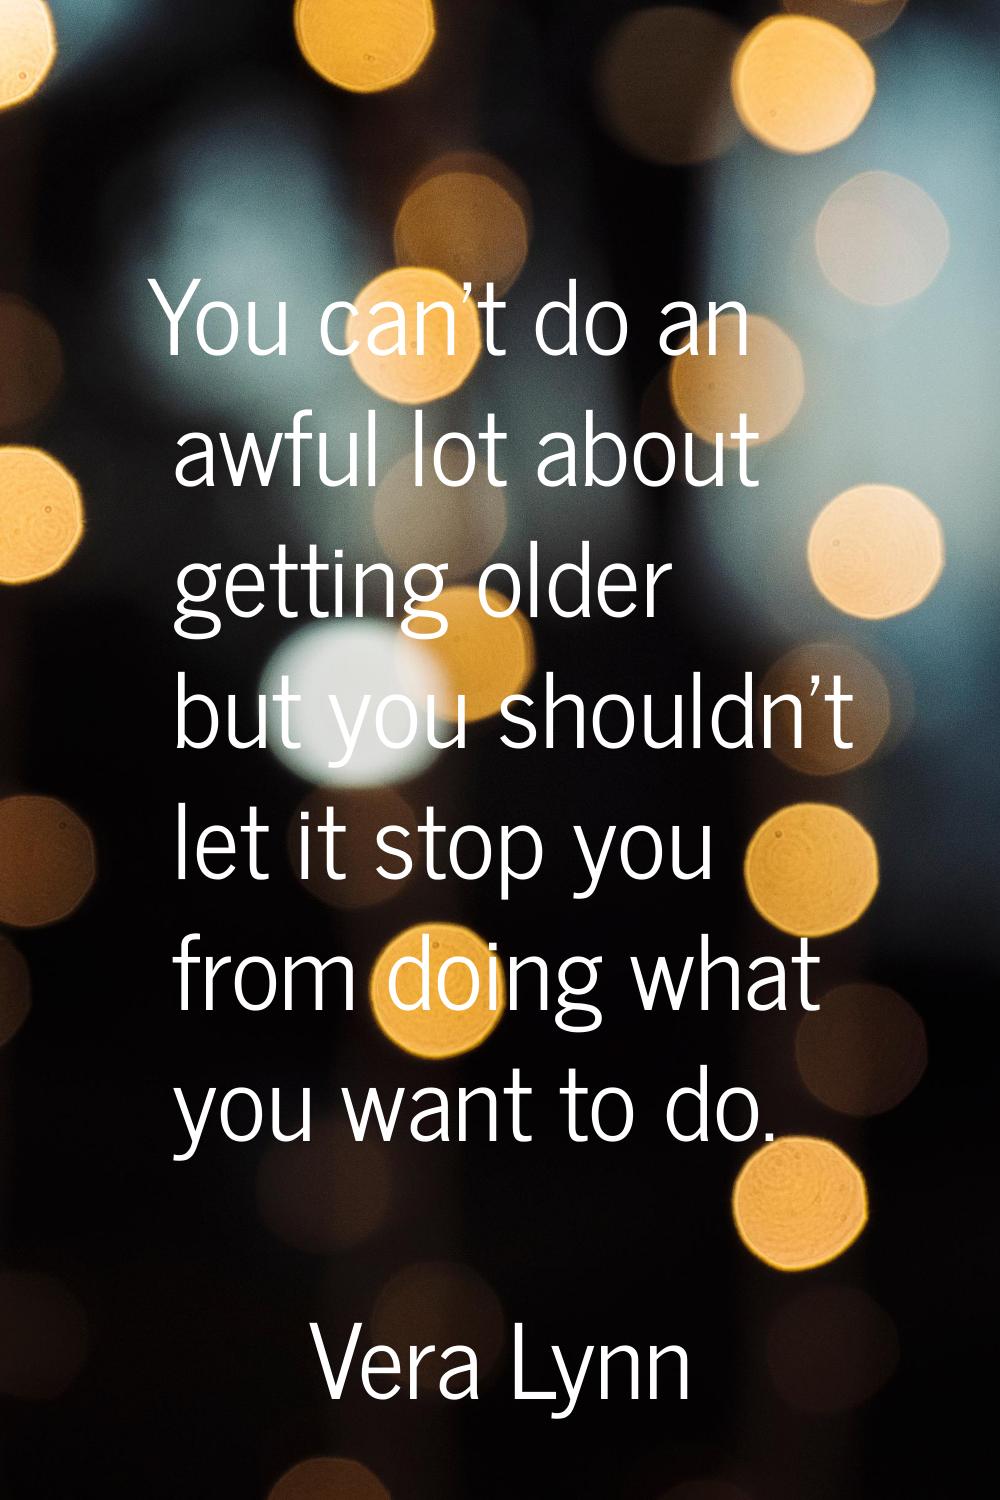 You can't do an awful lot about getting older but you shouldn't let it stop you from doing what you